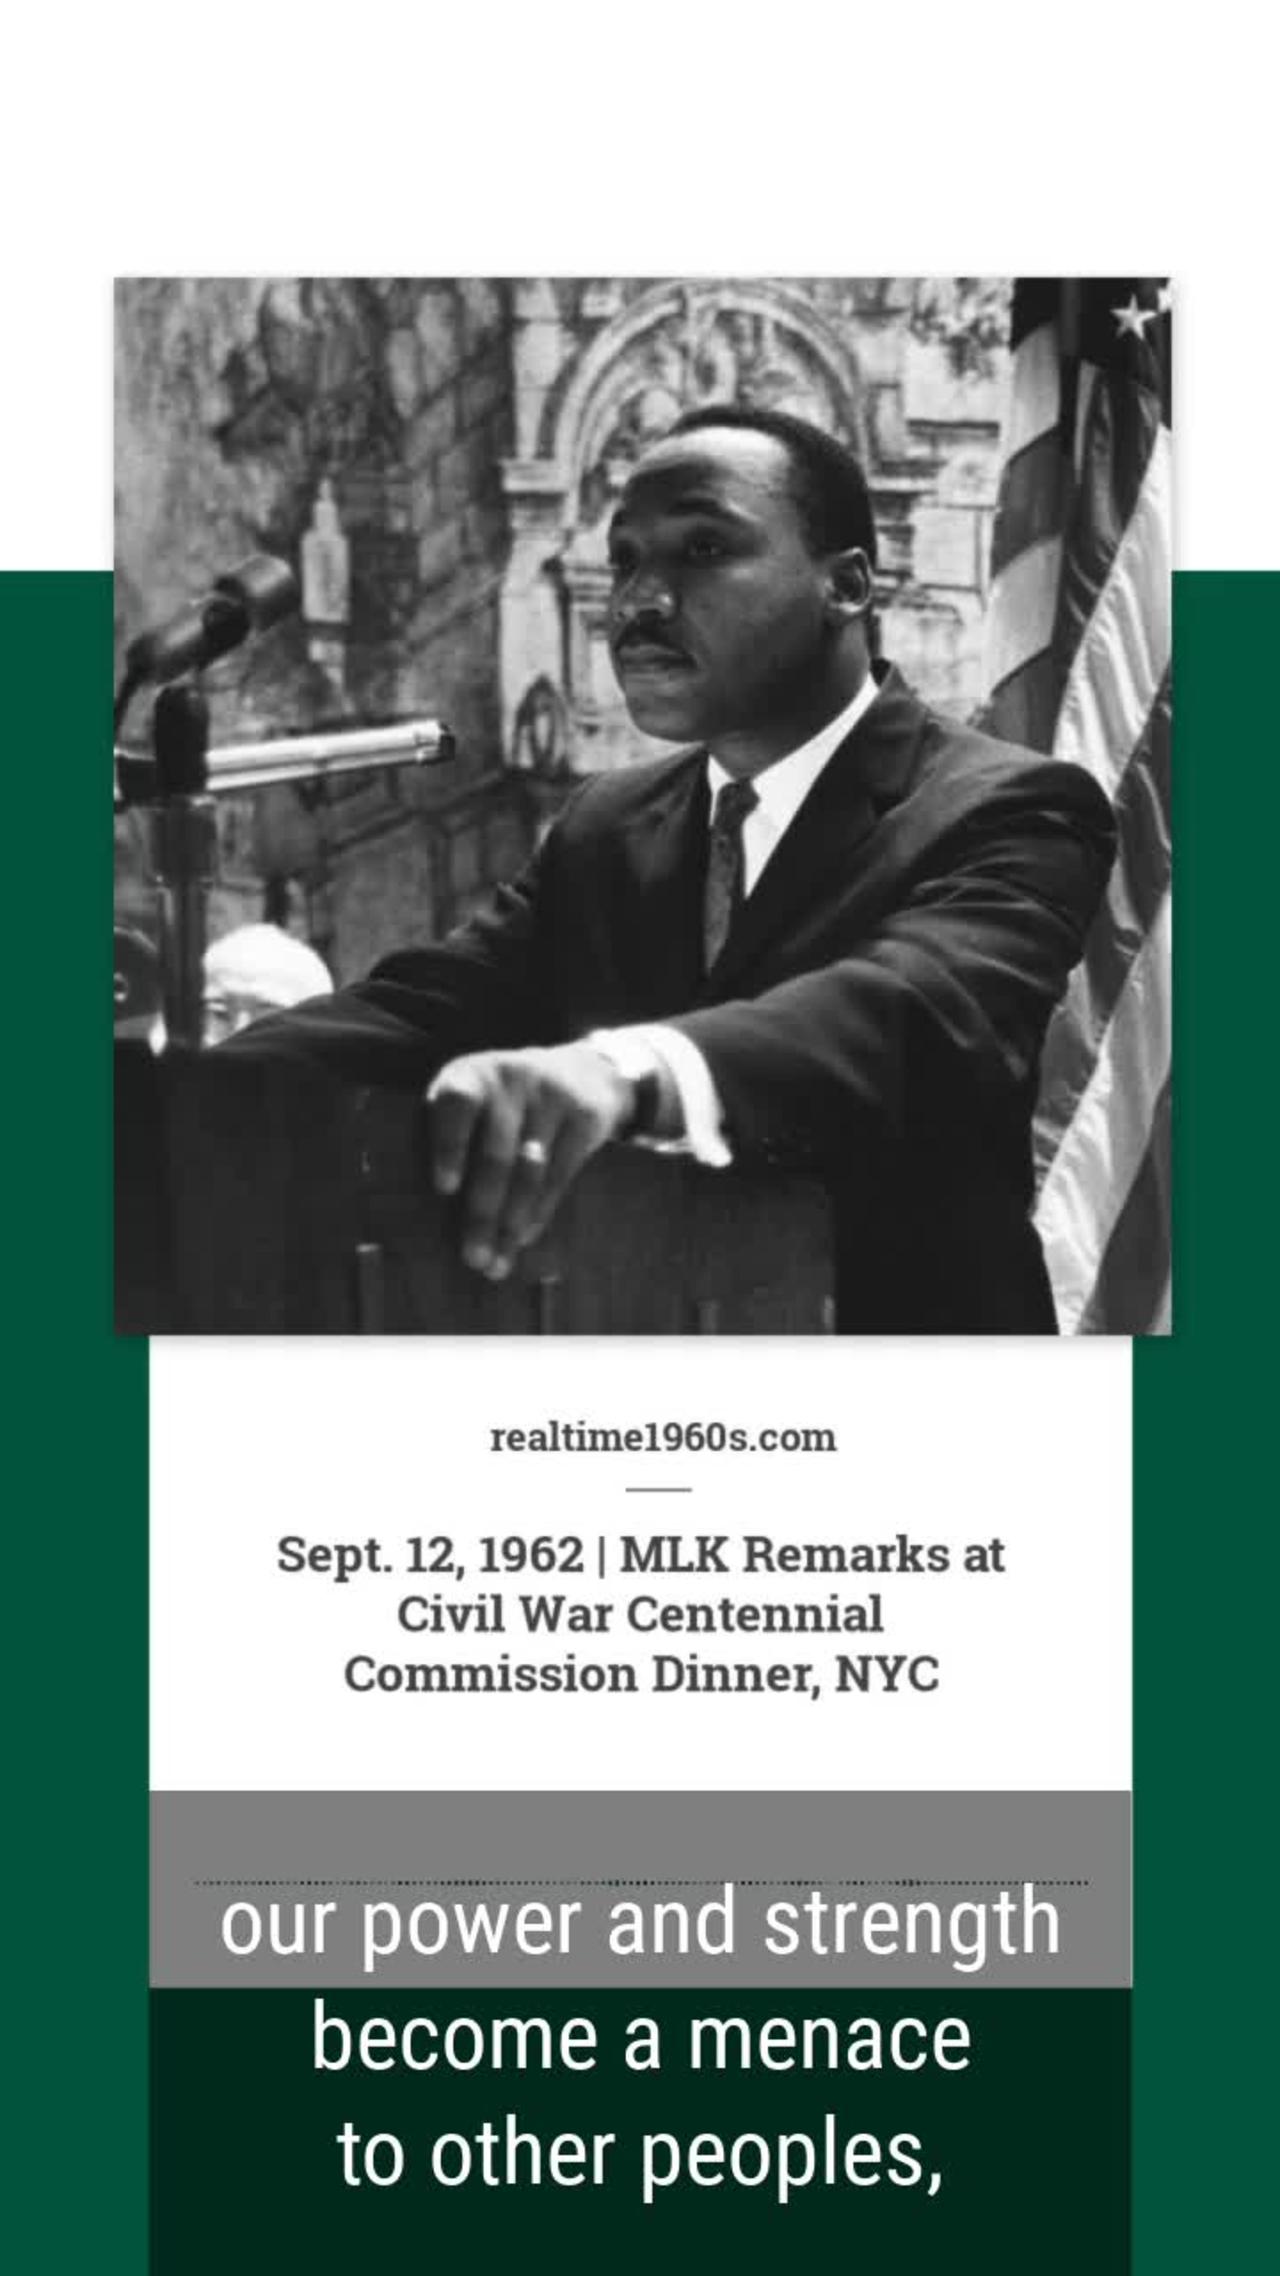 Sept. 12, 1962 - MLK in NYC